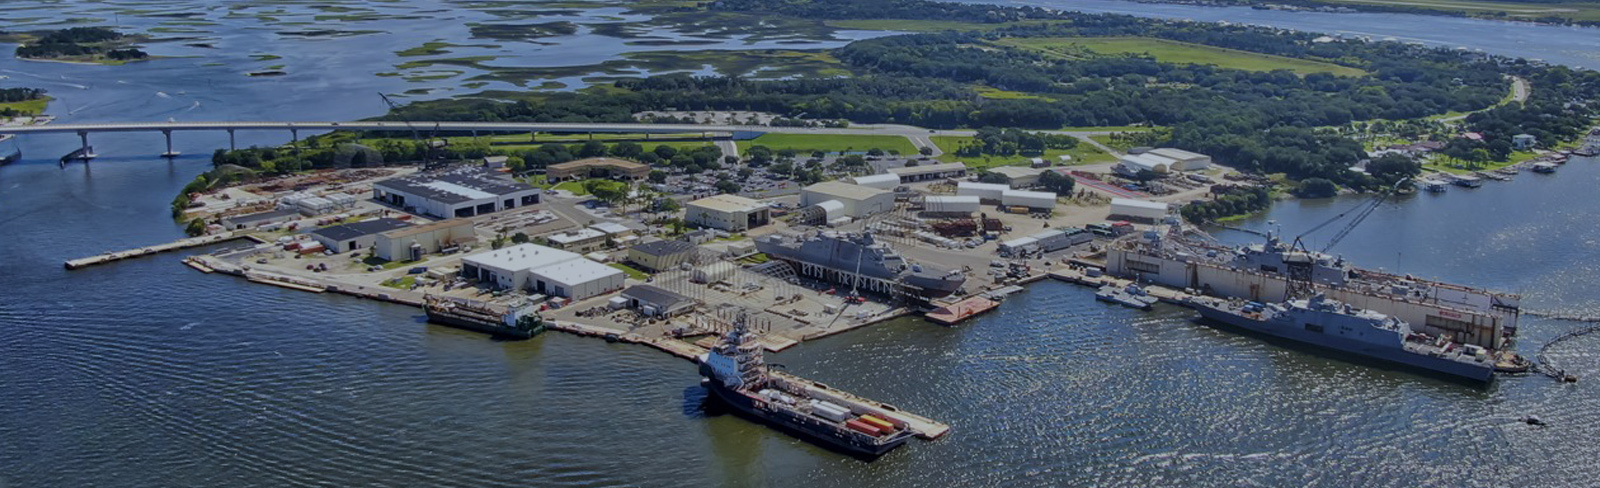 BAE Systems Jacksonville Ship Repair is located on St. Johns River, near the Atlantic Ocean.